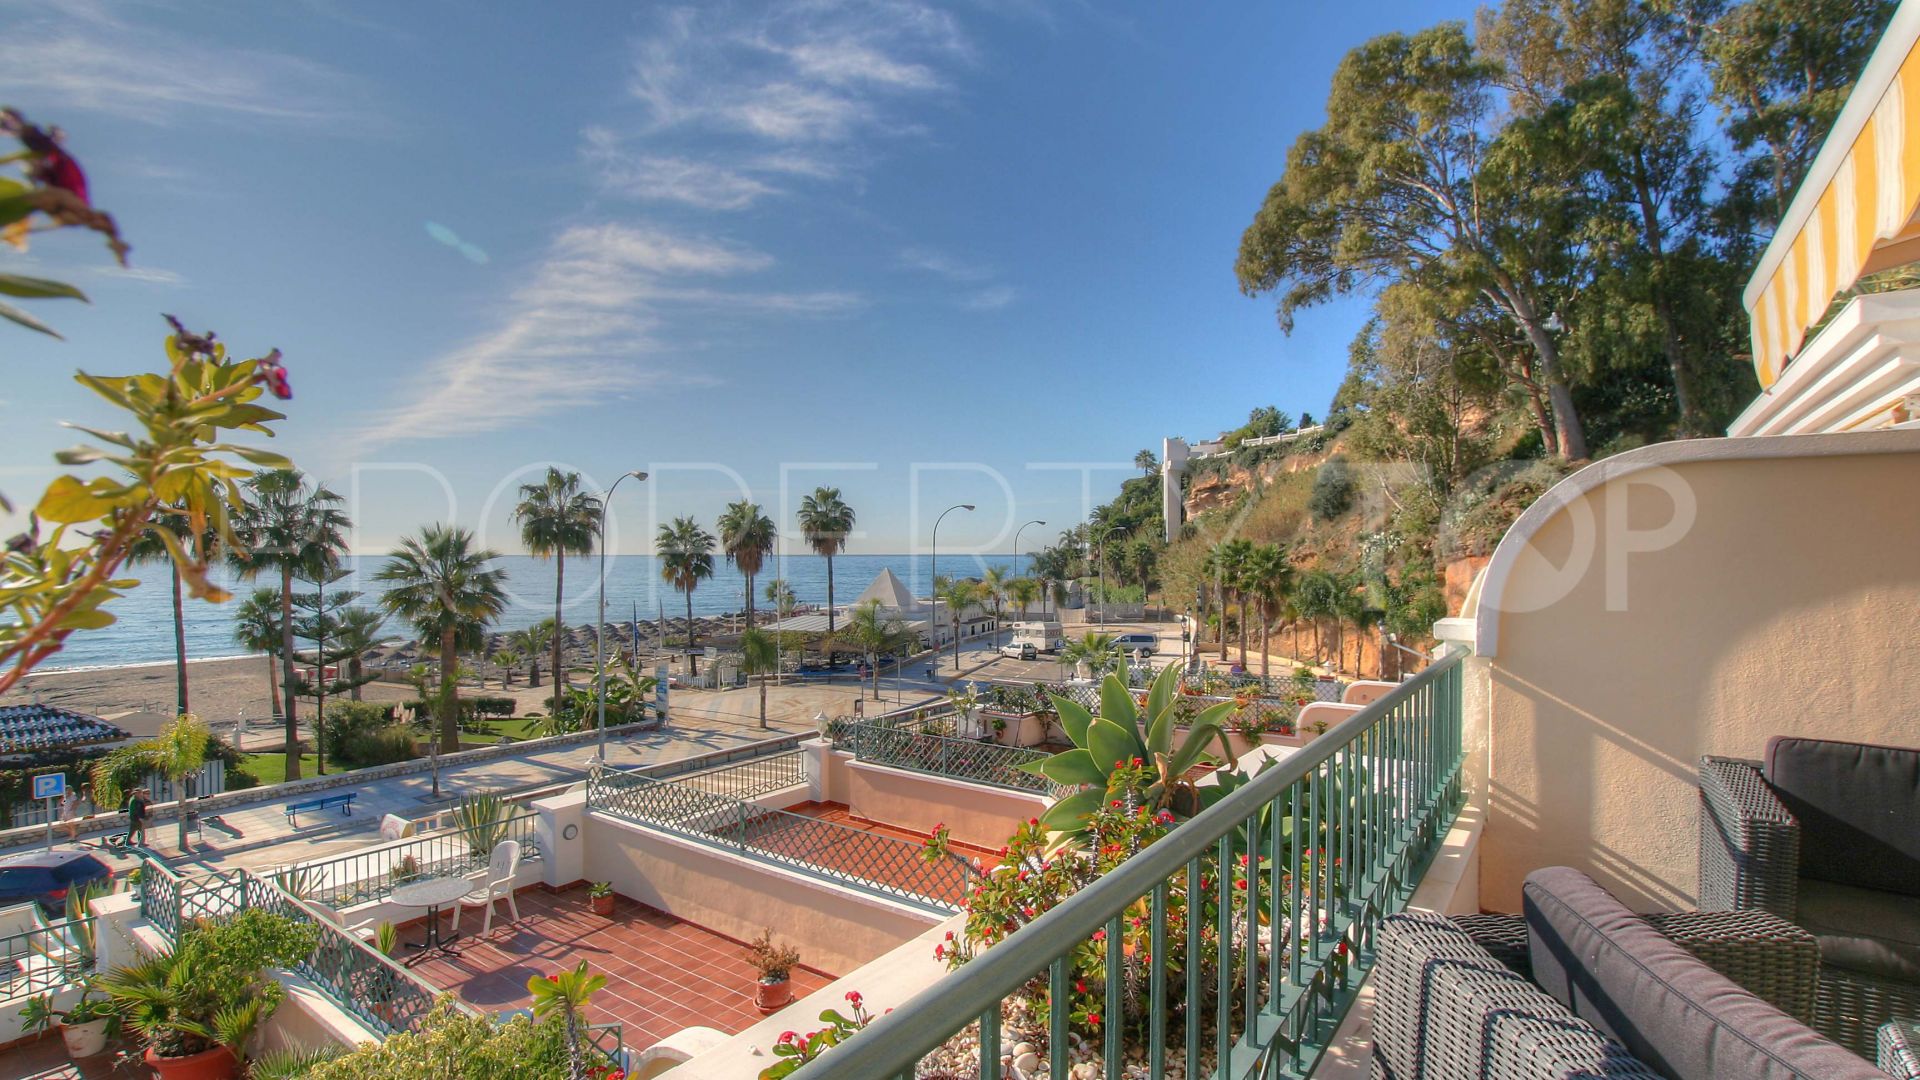 For sale Nerja 2 bedrooms apartment